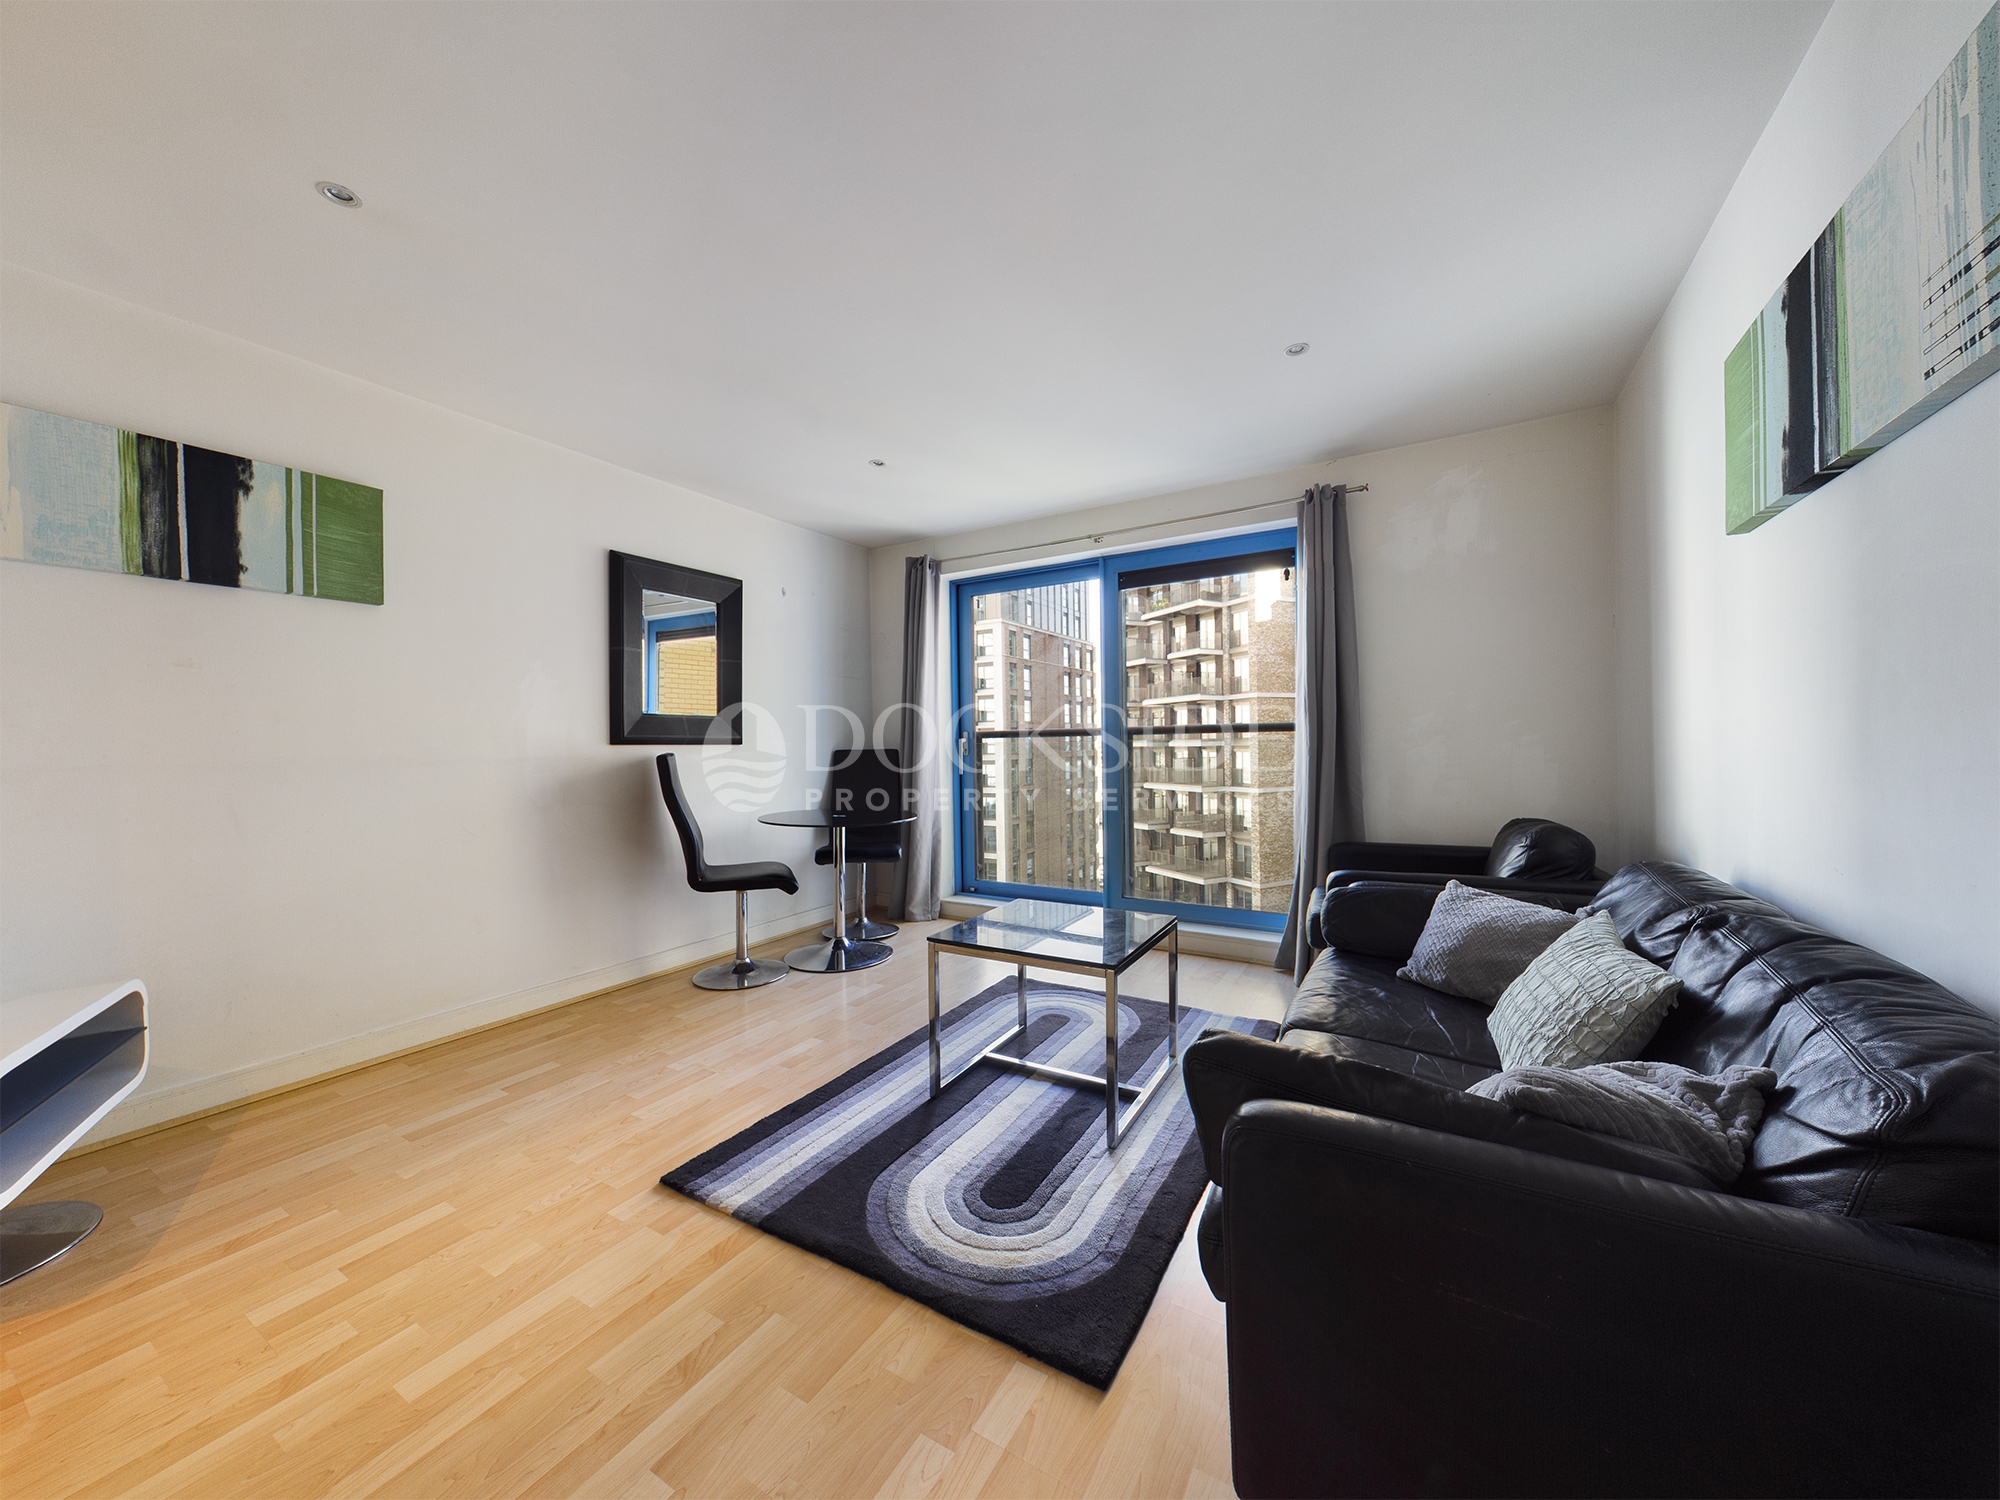 1 bed flat to rent in Western Gateway, London, E16 